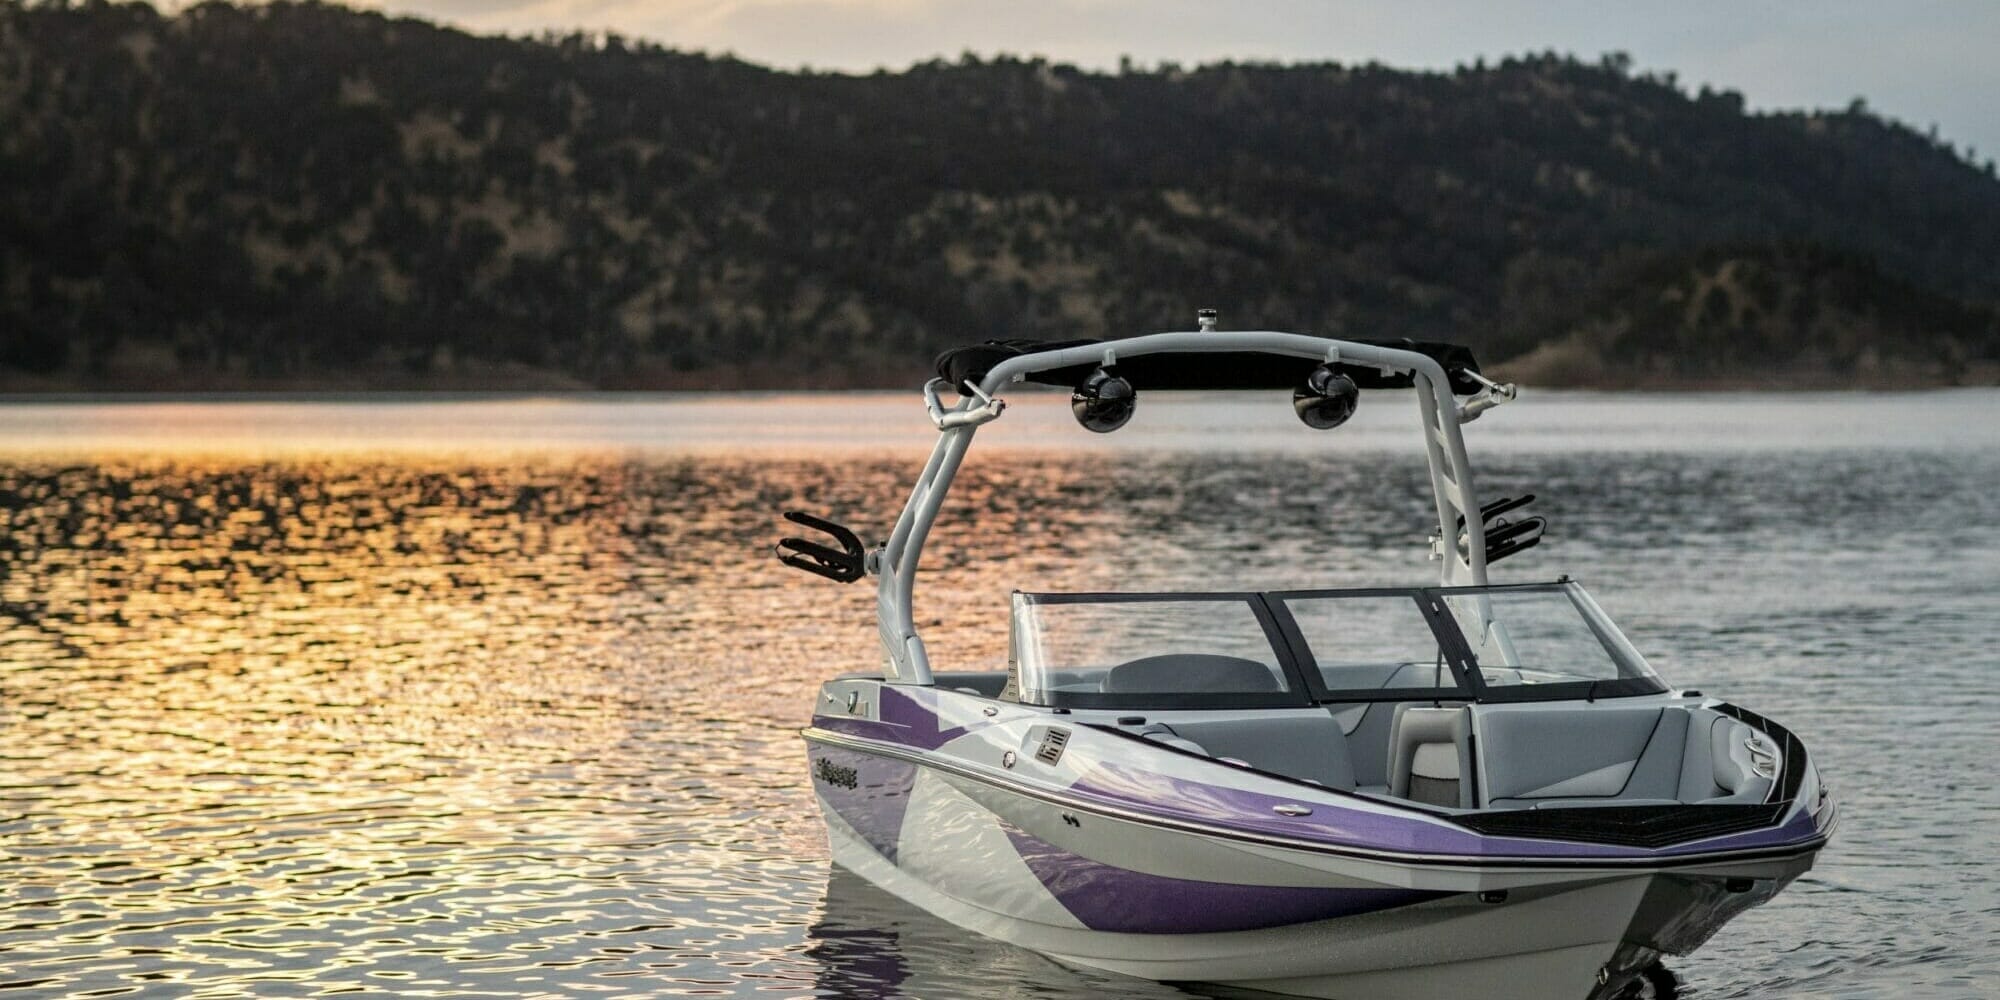 A Supreme boat sits on a lake at sunset.